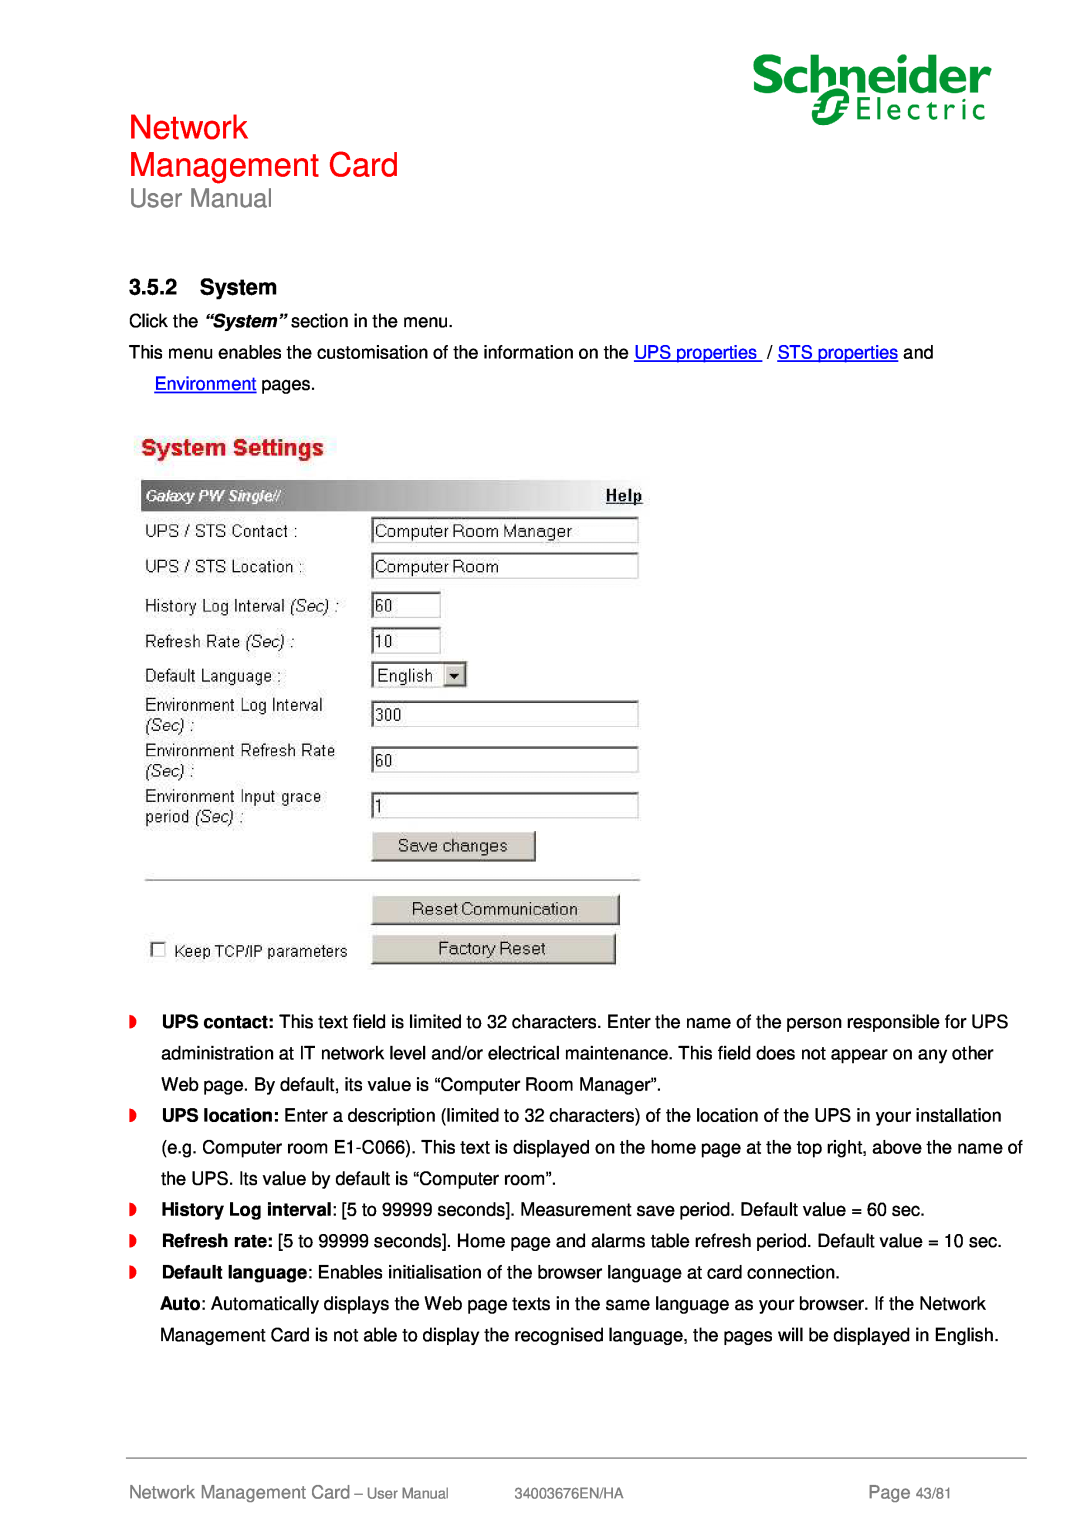 Schneider Electric 66074, 66846 user manual System, Network Management Card - User Manual, Page 43/81 